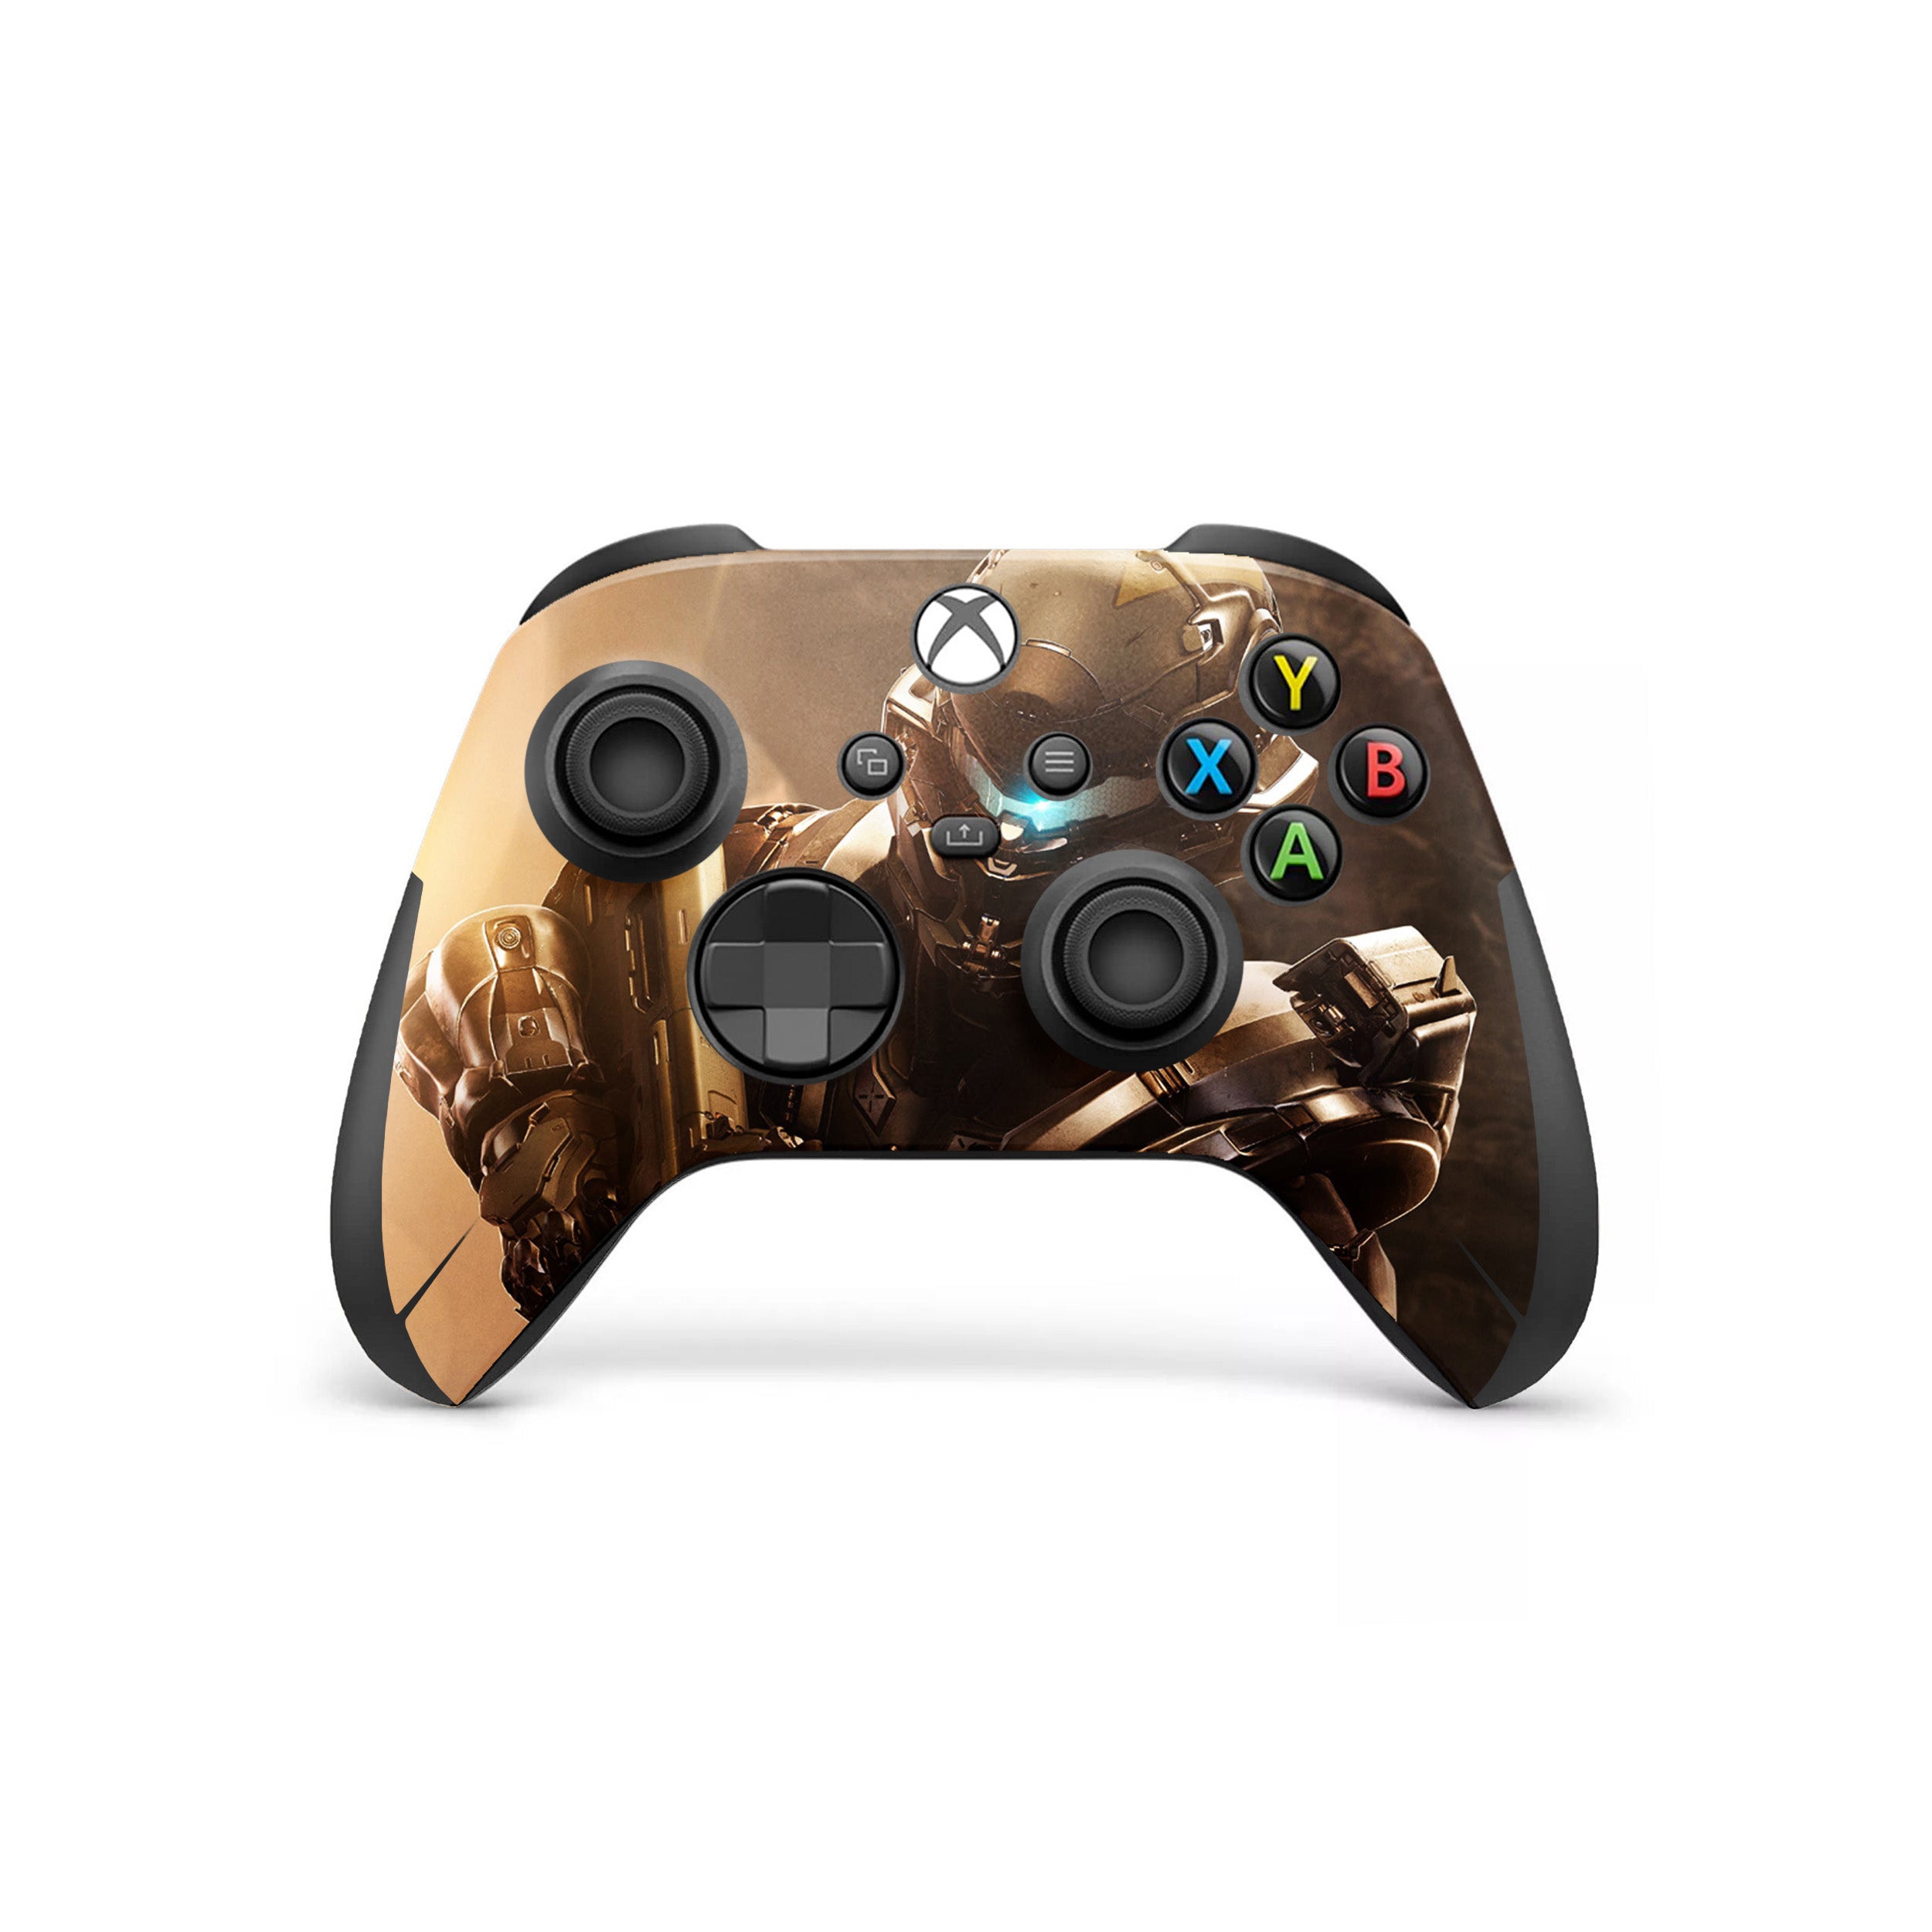 A video game skin featuring a Halo 5 design for the Xbox Wireless Controller.